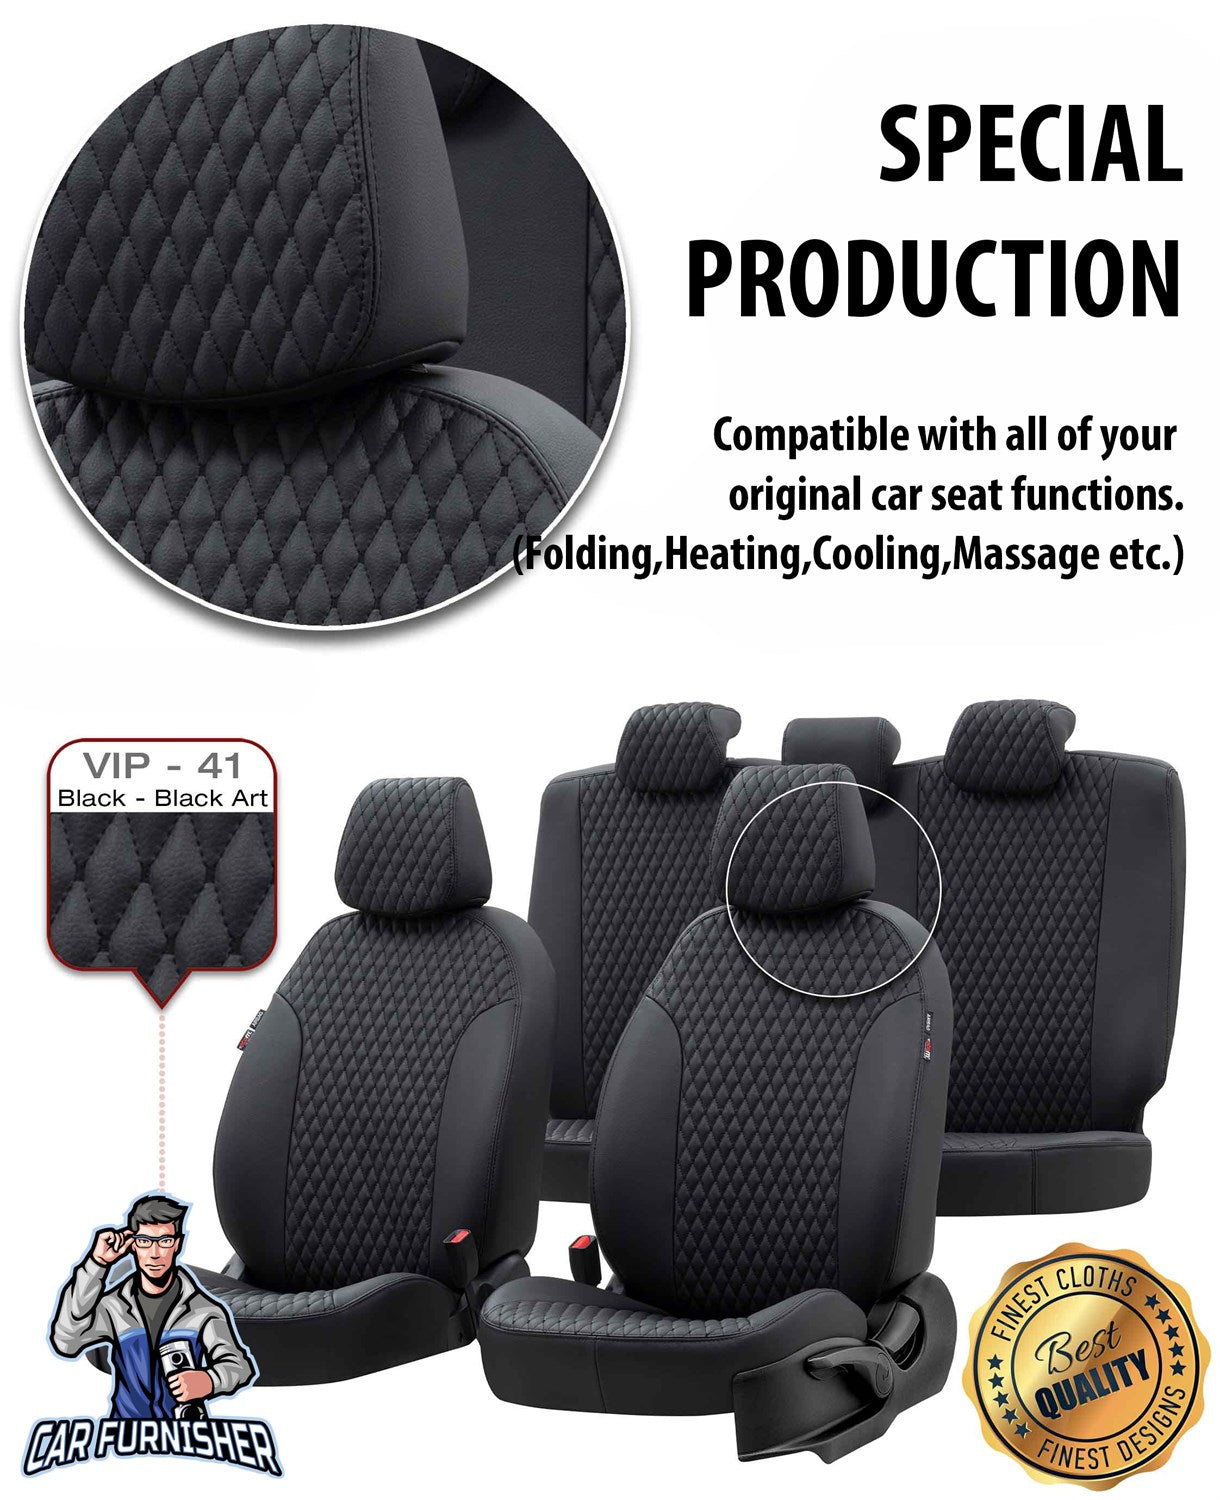 Kia Ceed Seat Covers Amsterdam Leather Design Smoked Black Leather